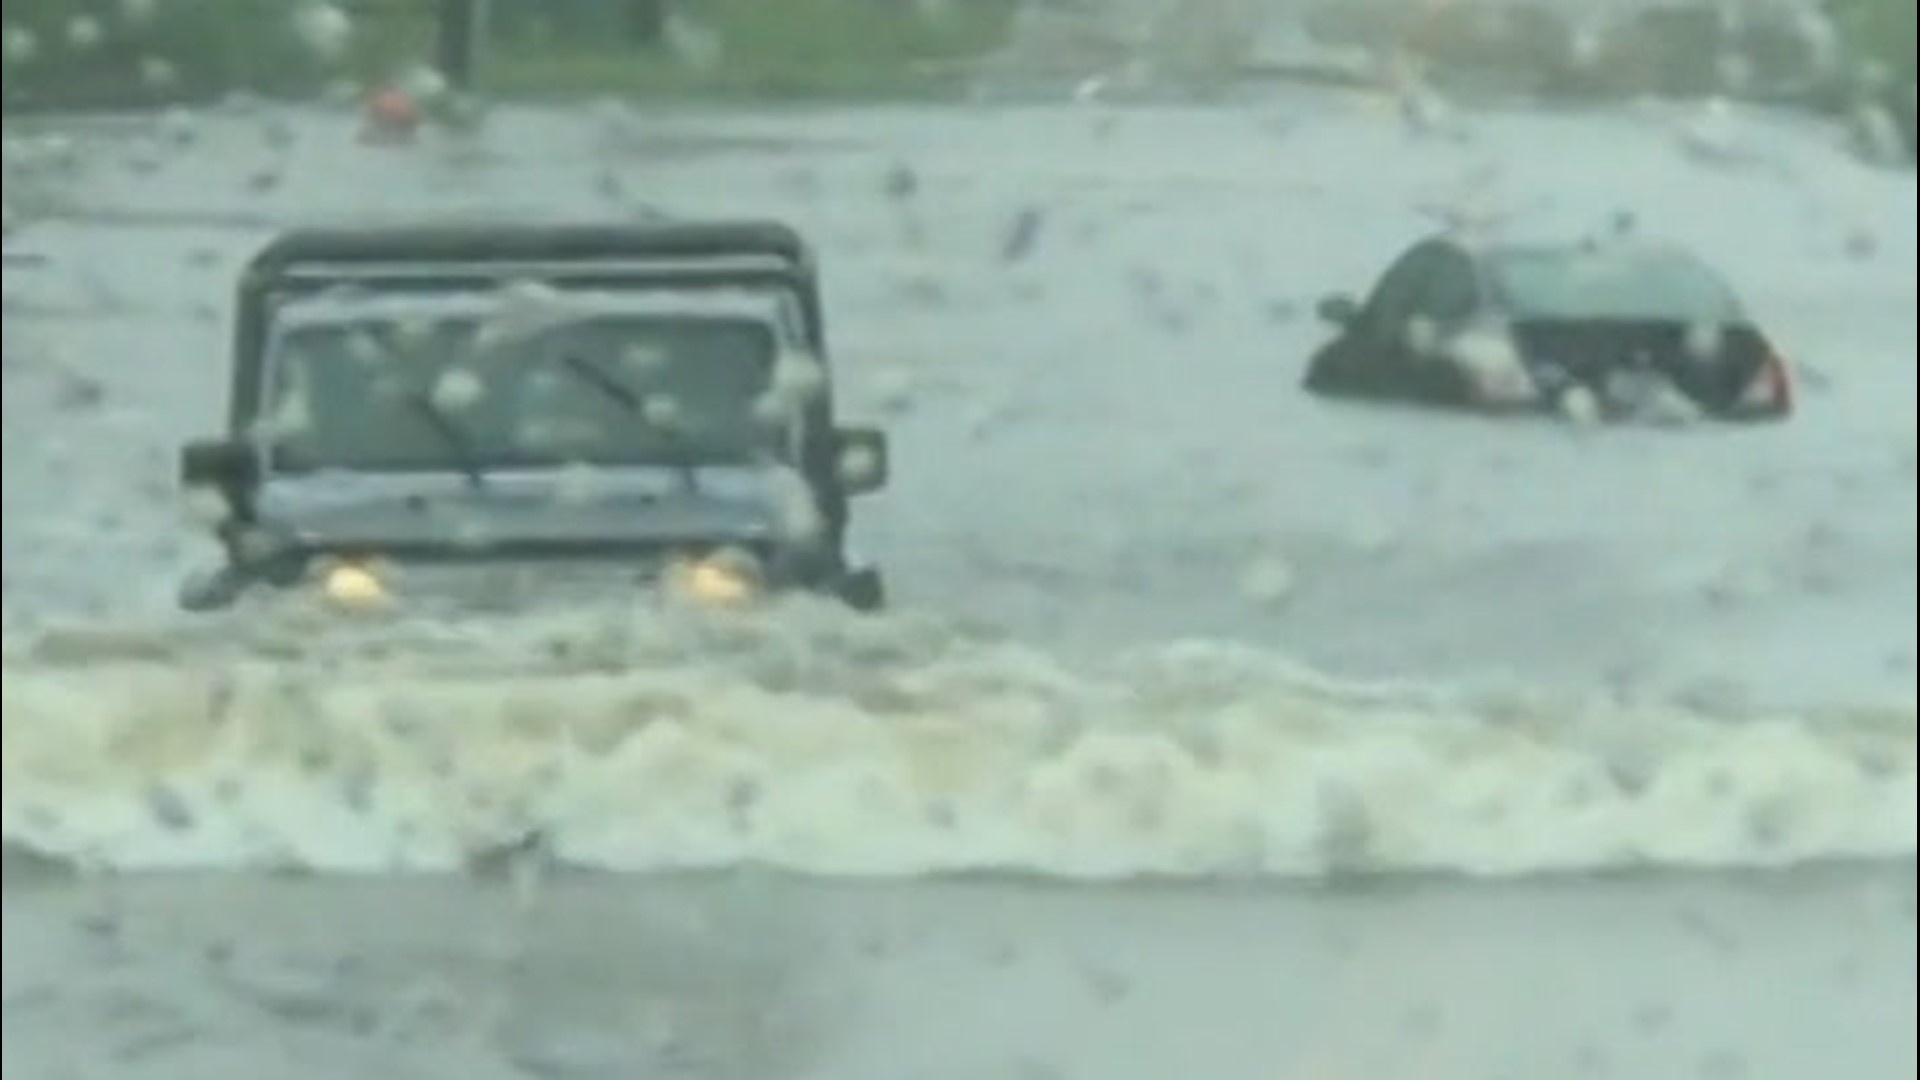 Despite deep floodwaters, drivers attempted to drive through this road in Pensacola, Florida, in mid-September, as Hurricane Sally soaked the Gulf Coast region, triggering widespread flash flooding.